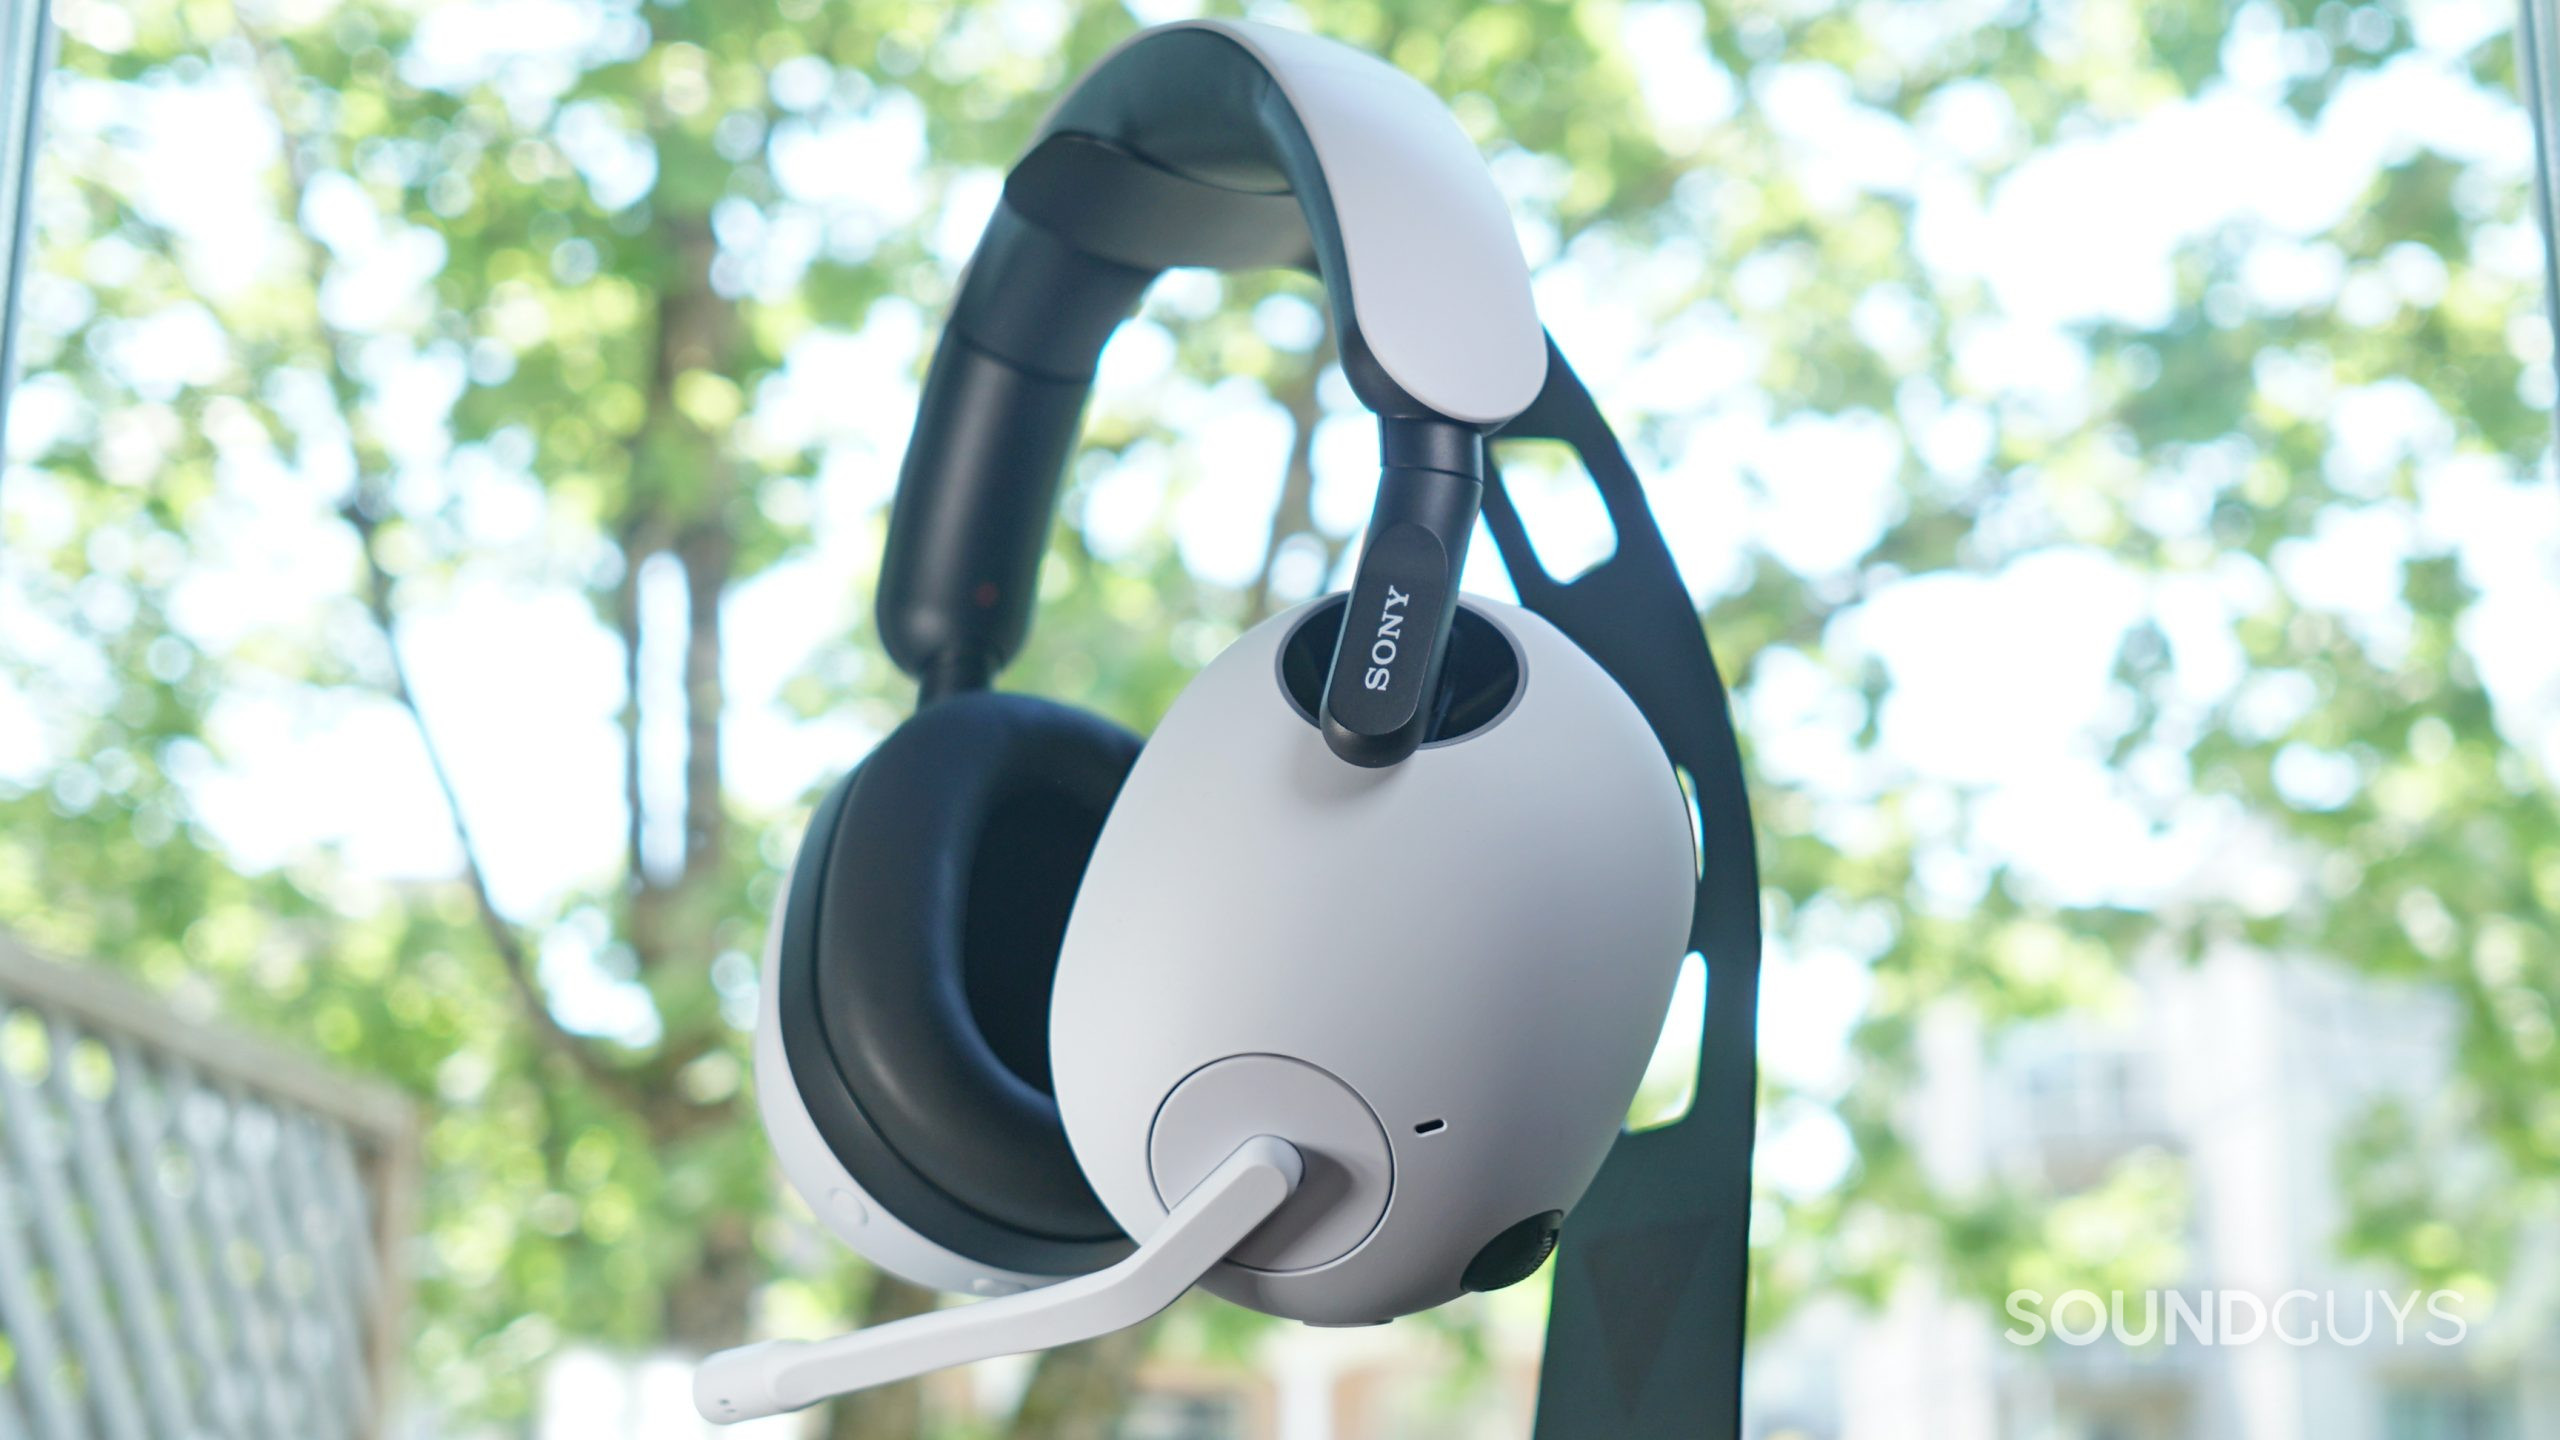 Sony Pulse 3D Wireless Headset Review: Style Over Performance